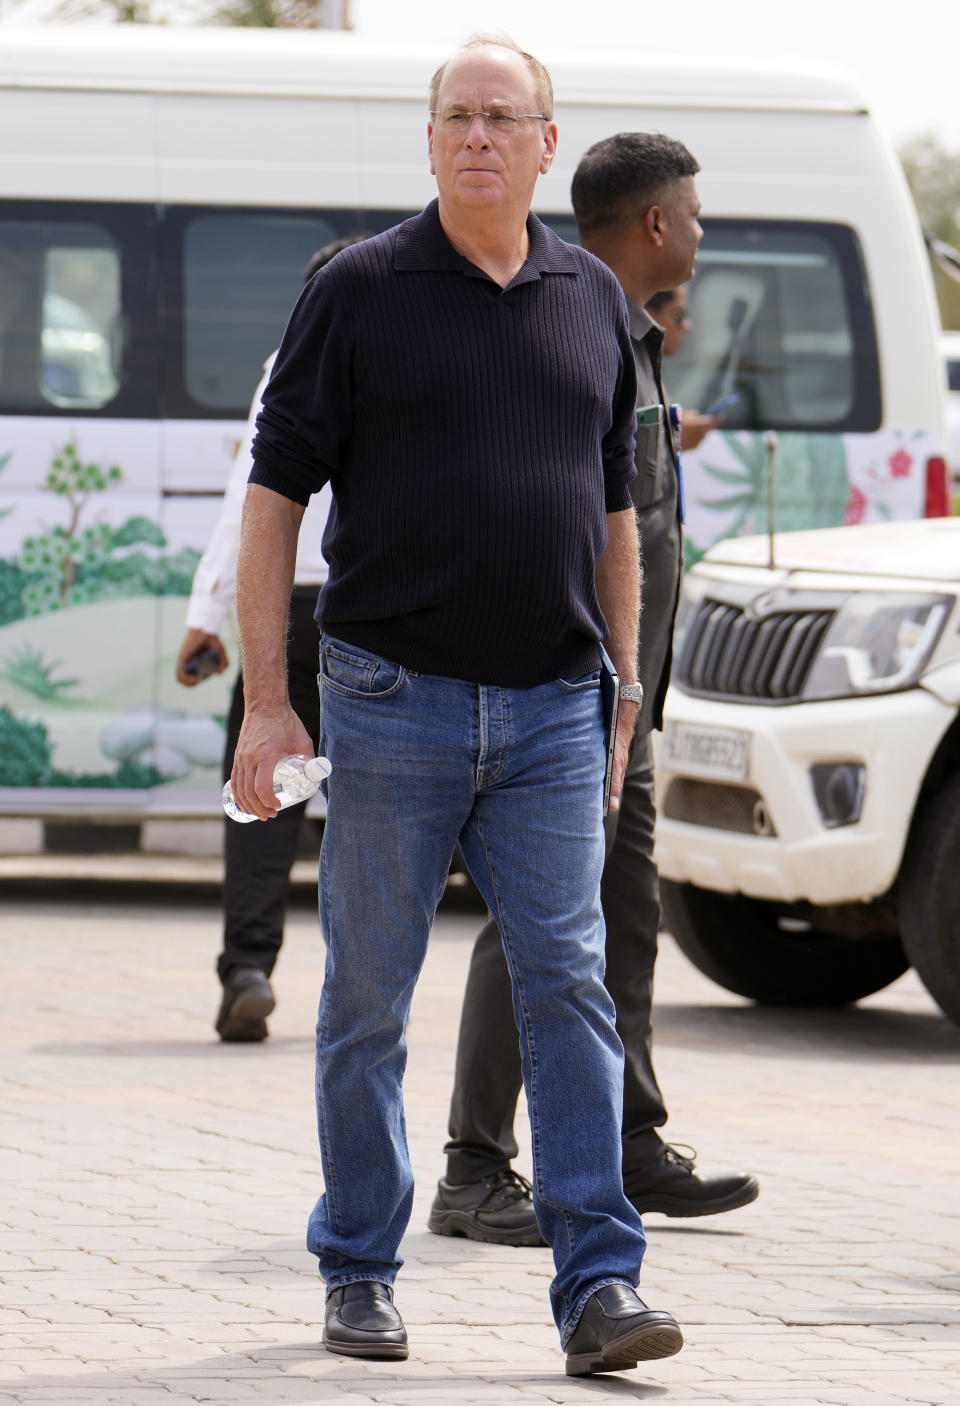 Larry Fink, chairman and CEO of BlackRock. arrives to attend a pre-wedding bash of billionaire industrialist Mukesh Ambani's son Anant Ambani, in Jamnagar, India, Friday, March 1, 2024. (AP Photo/Ajit Solanki)